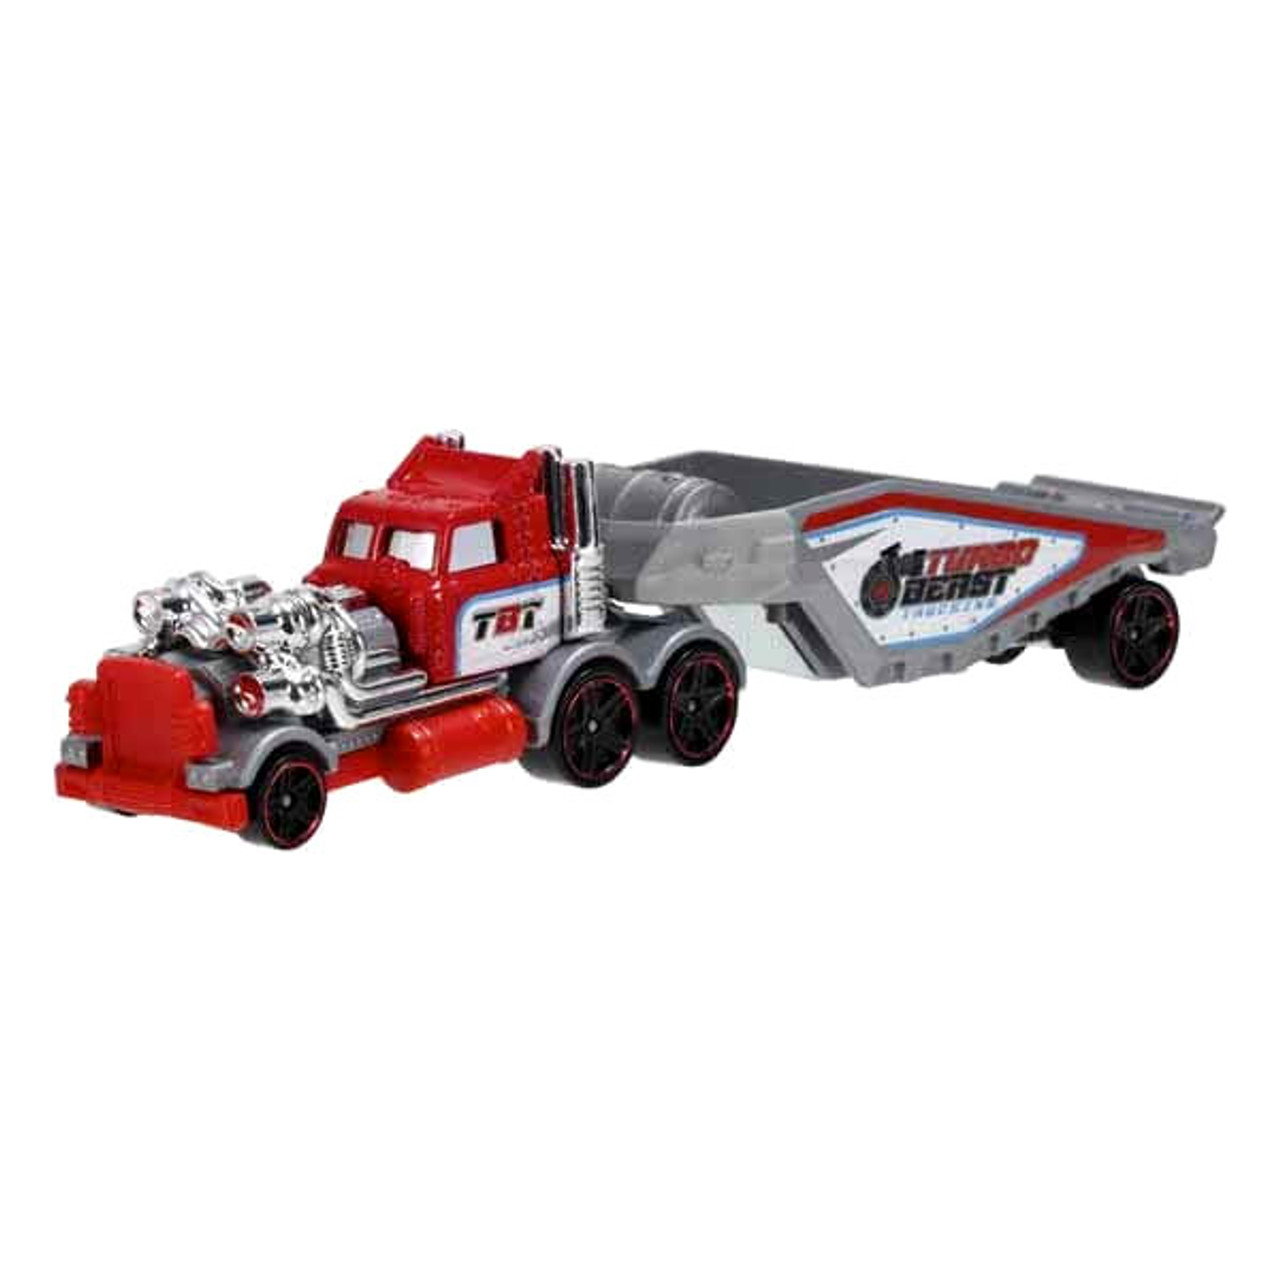 Hot Wheels Monster Trucks, Transporter and Track with 1:64 Scale Toy Truck  